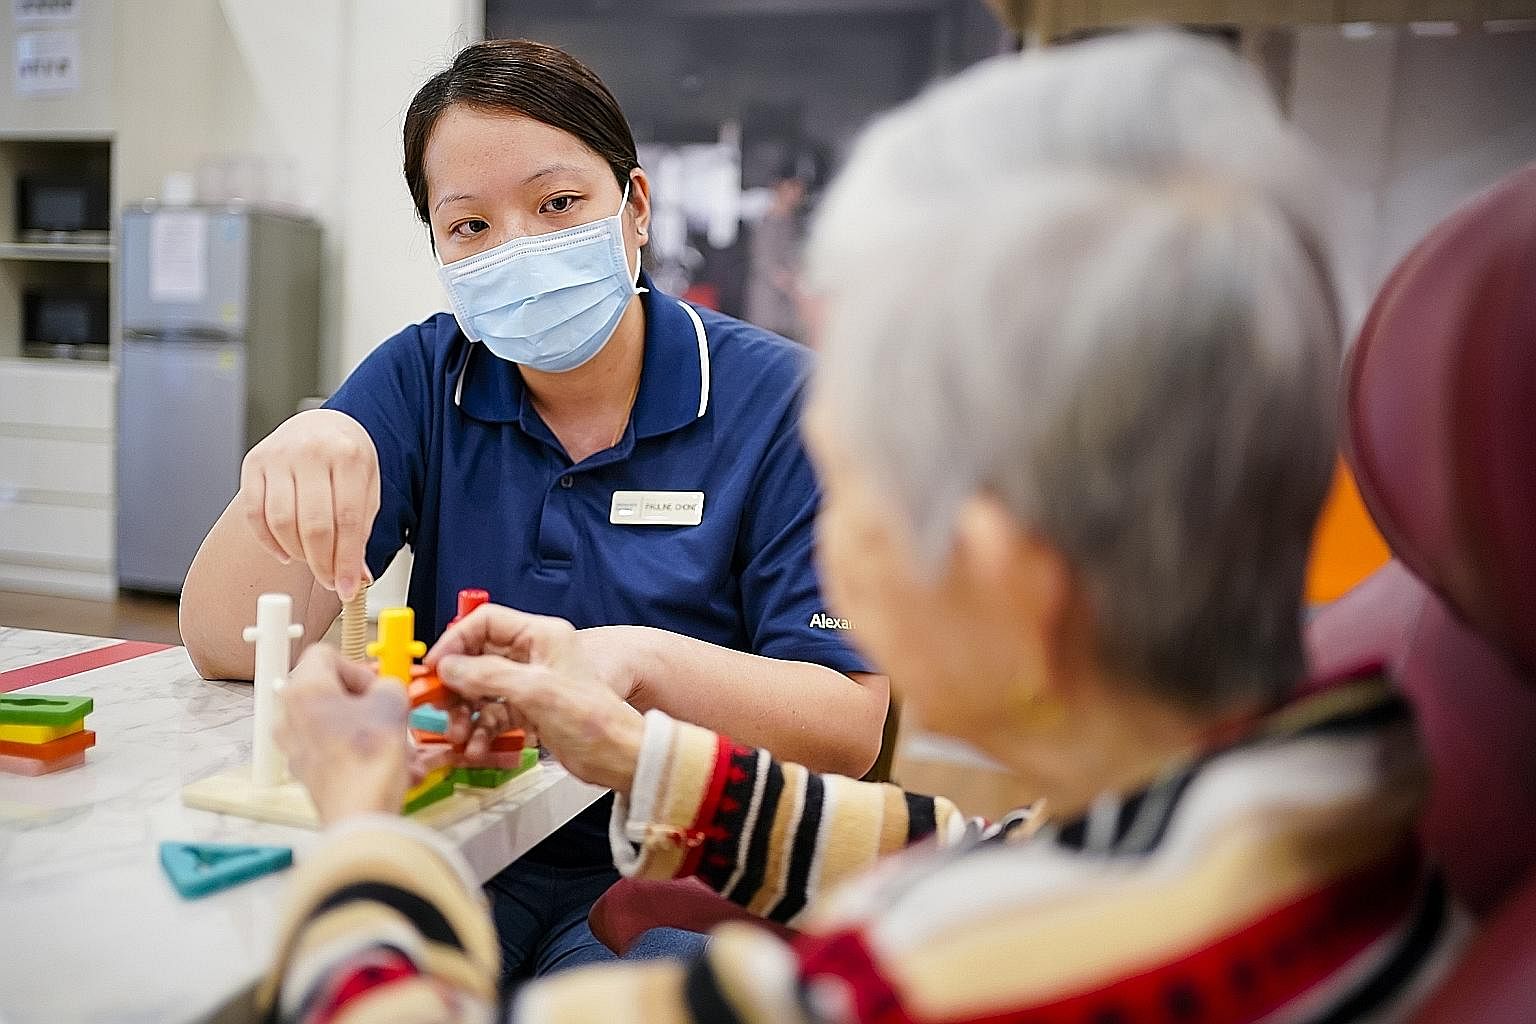 Ms Pauline Chong, 40, works as a senior nurse clinician in the general and geriatric wards at Alexandra Hospital. She caught the severe acute respiratory syndrome, or Sars, in 2003 when working as a junior nurse at the National University Hospital. N